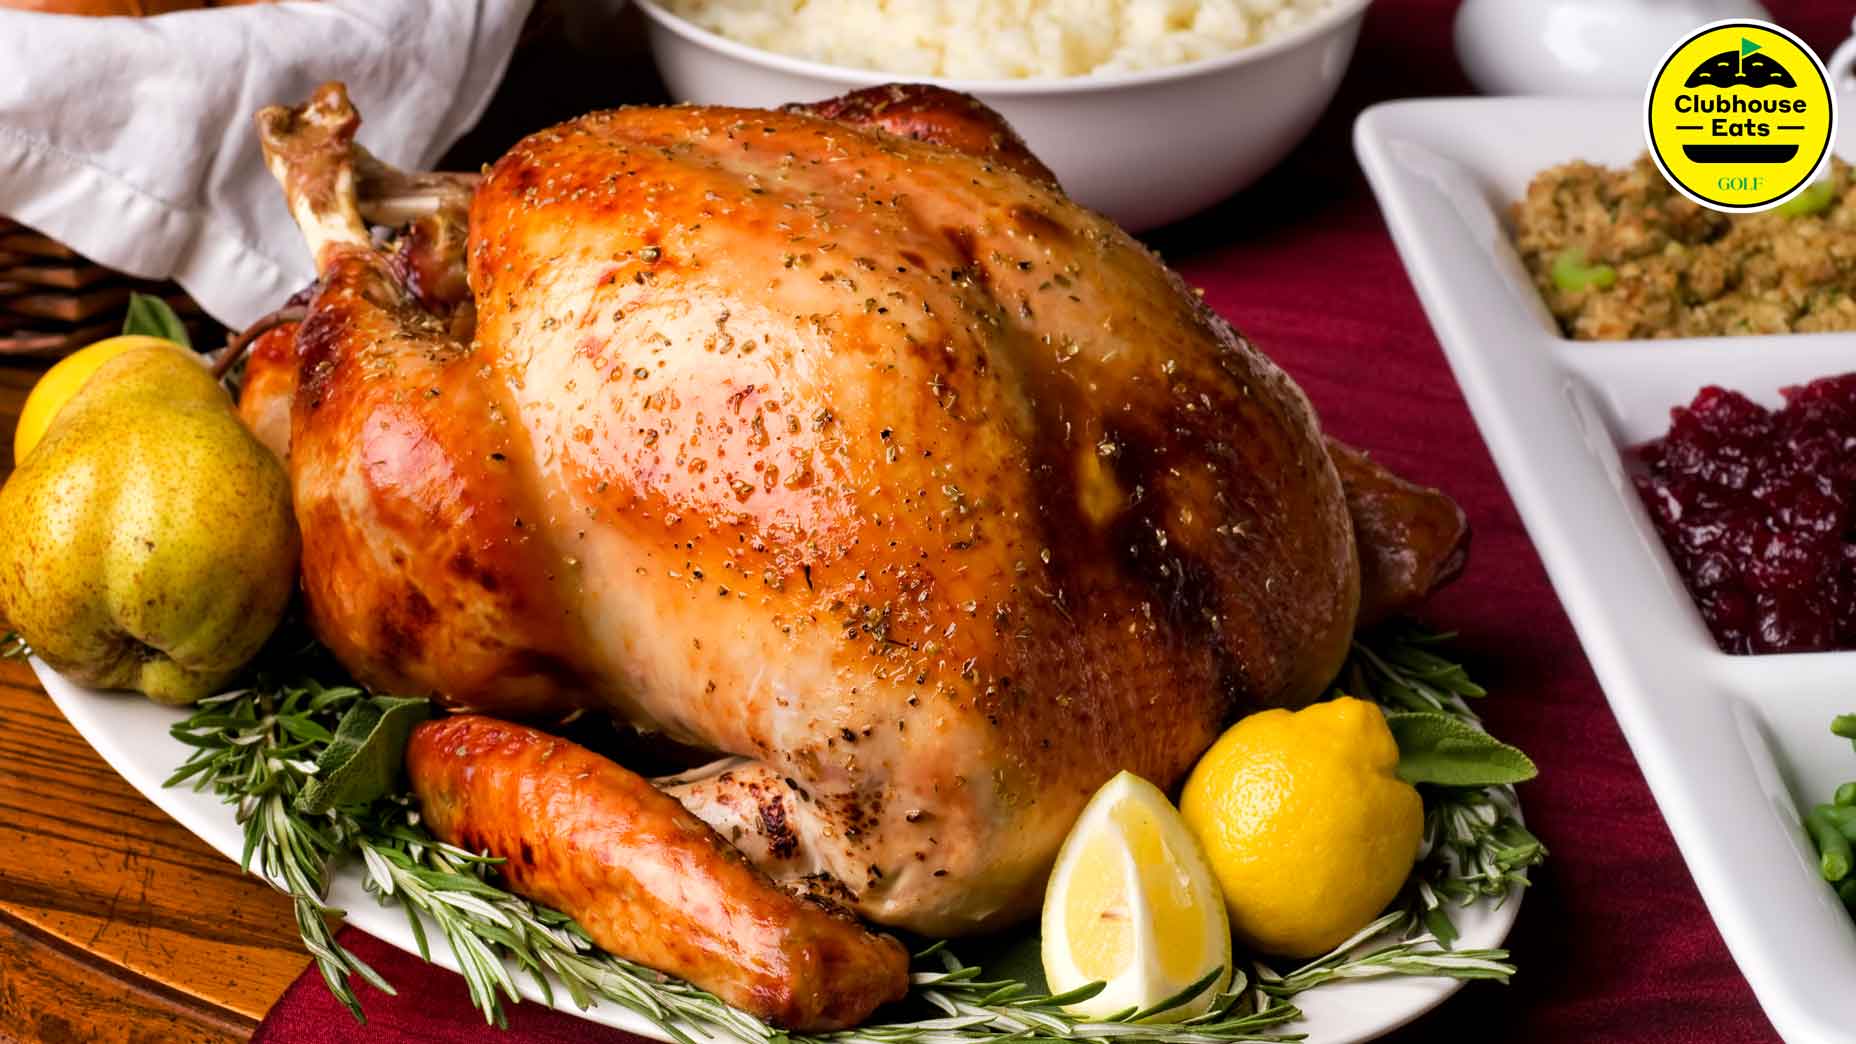 How to cook a perfect Thanksgiving turkey, according to a Michelin chef